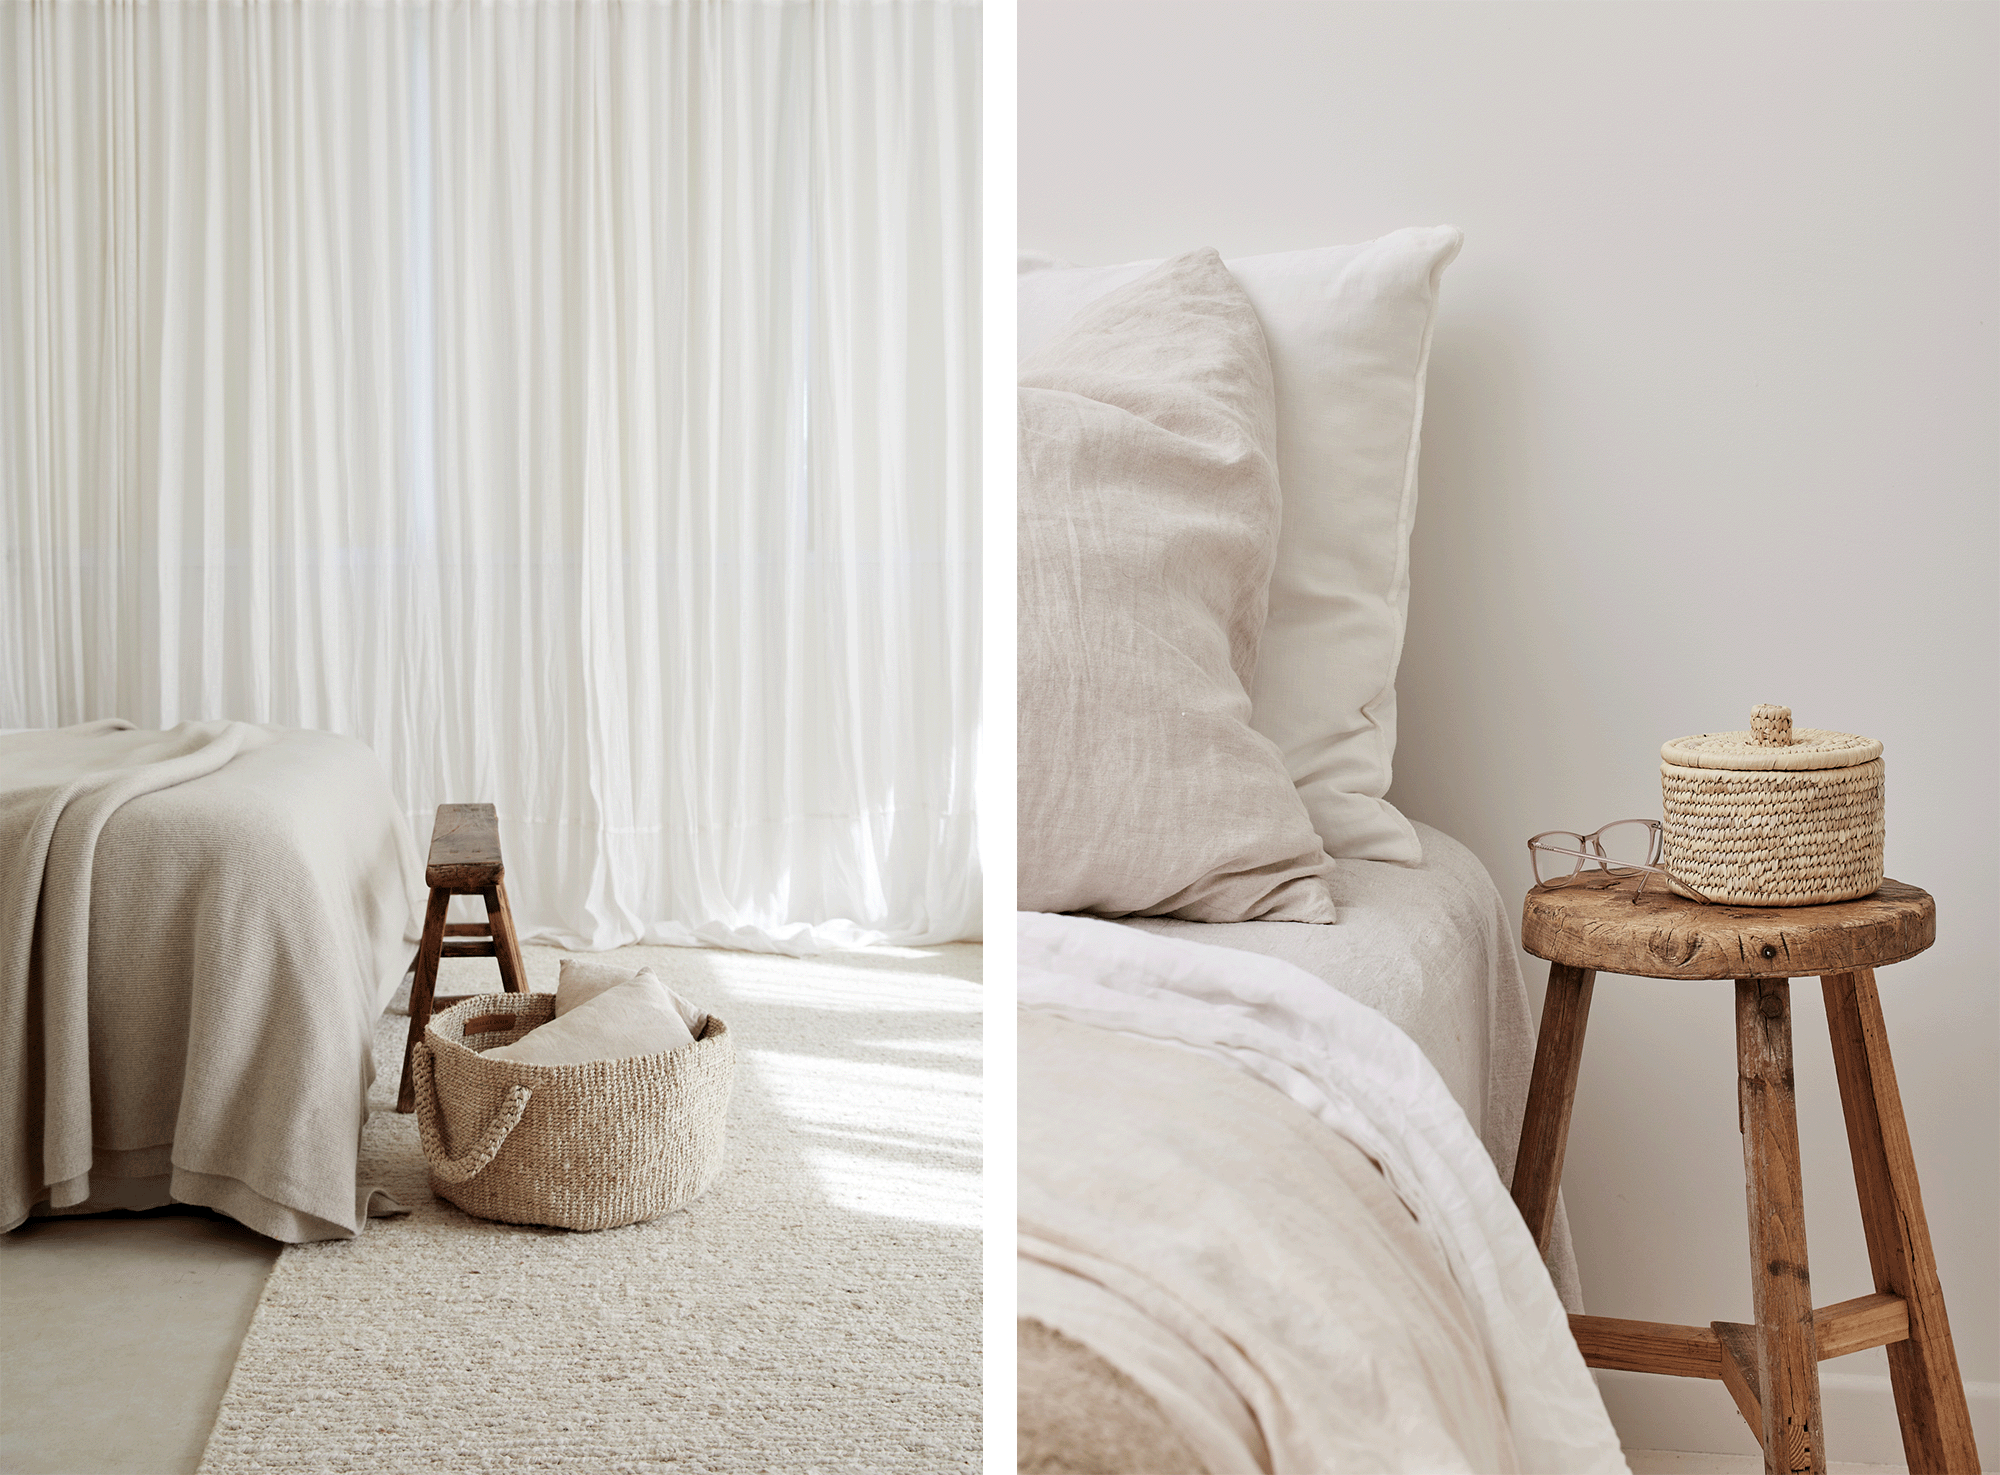 Woven baskets in bedrooms